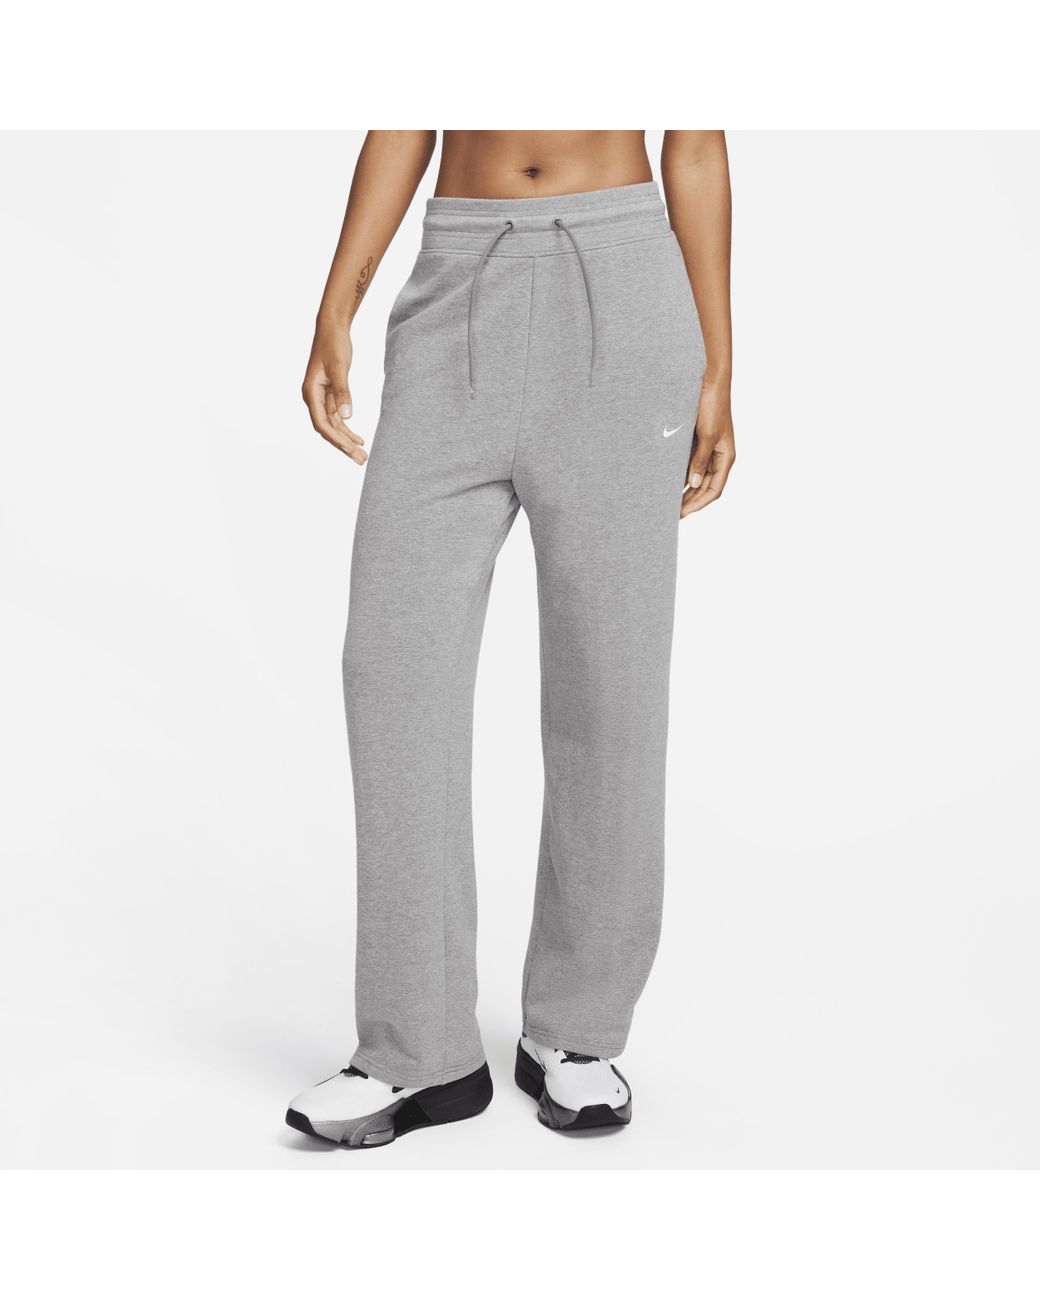 Nike Dri-fit One High-waisted Full-length Open-hem French Terry